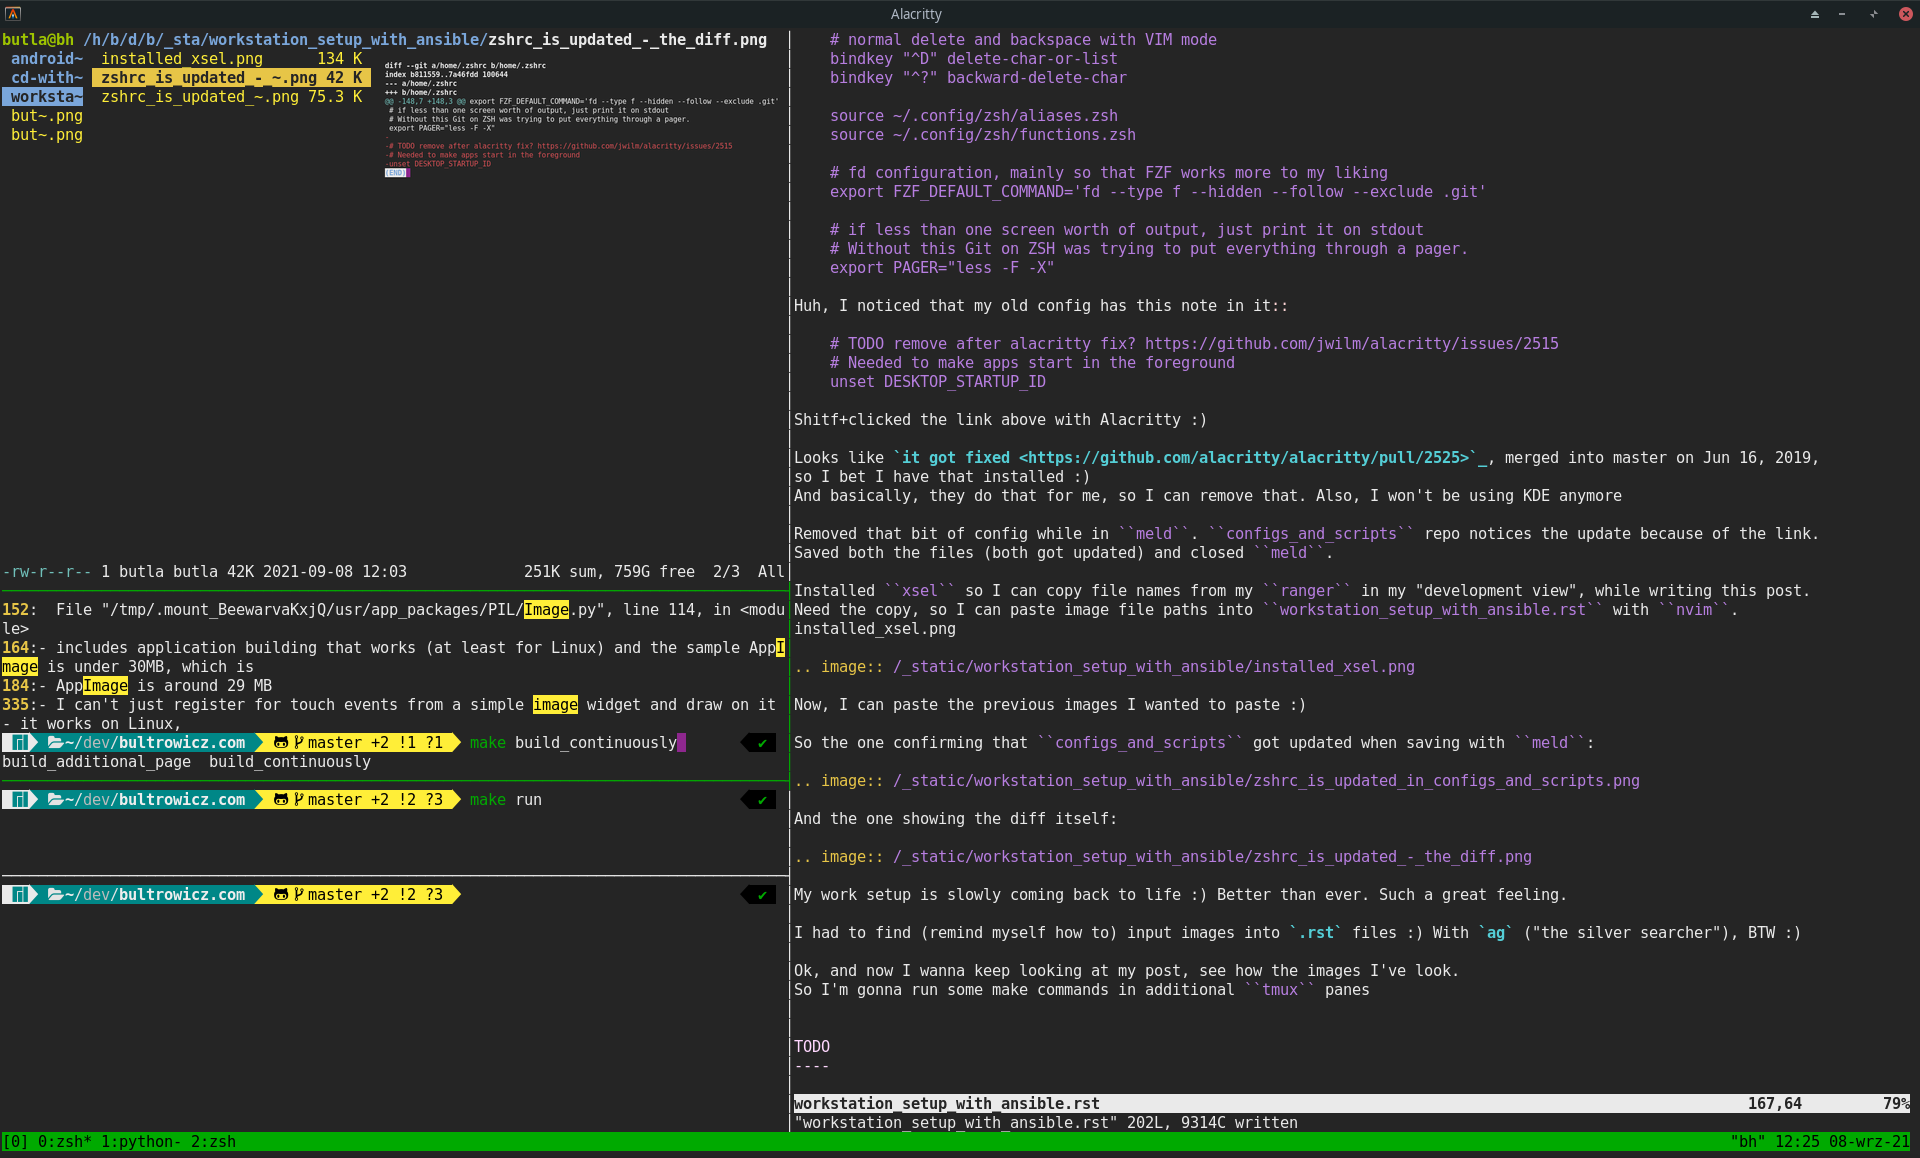 ../_images/tmux_panes_with_rebuilding.png